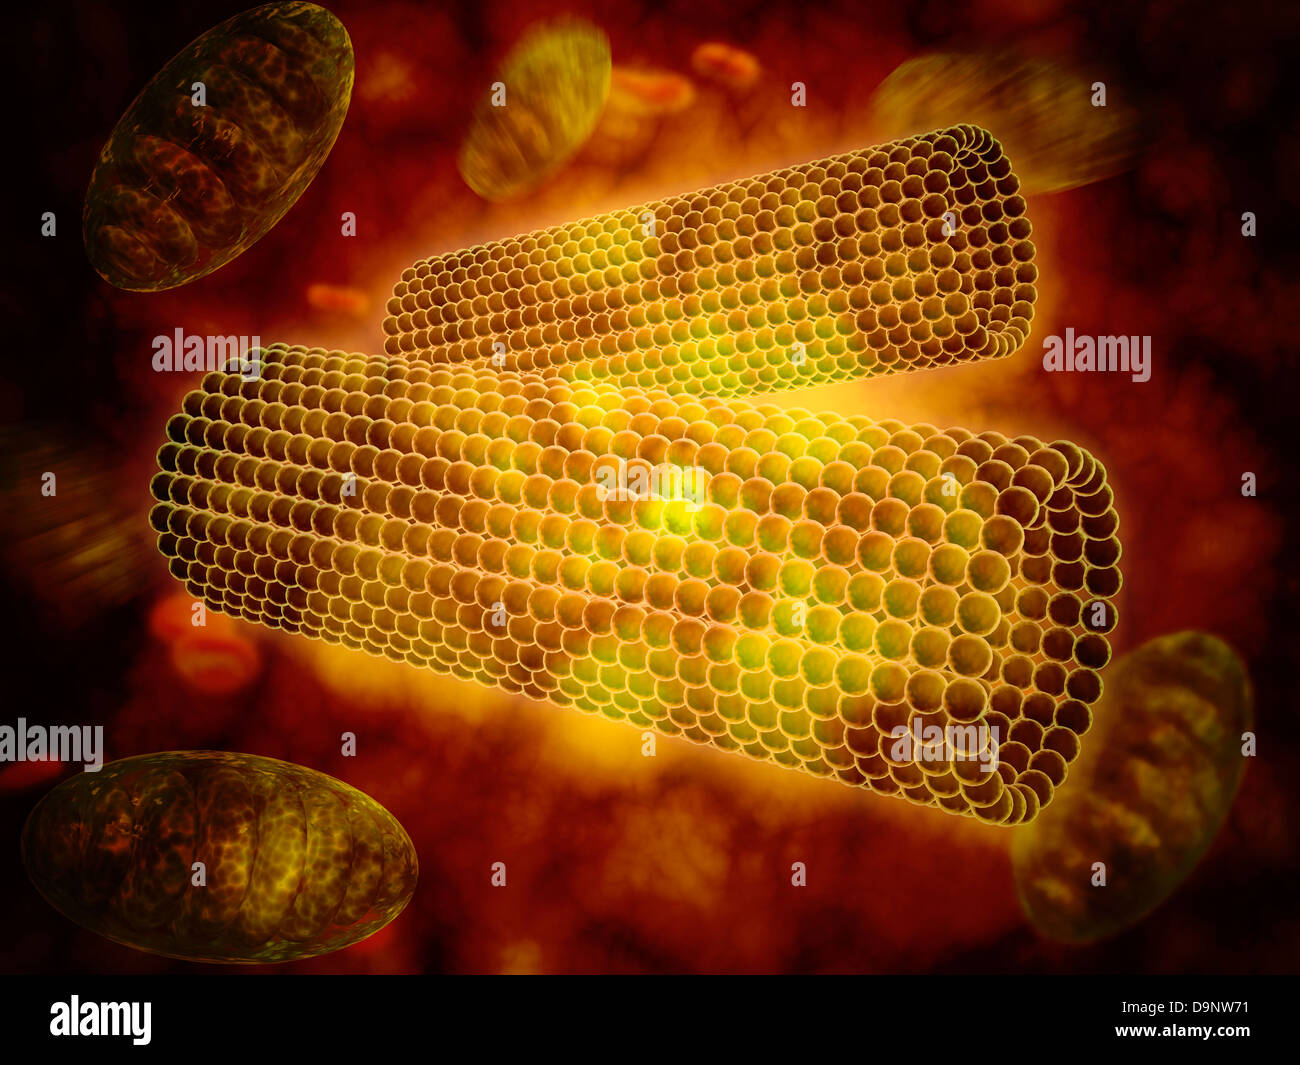 Microscopic view of centrioles within a human cell. Stock Photo